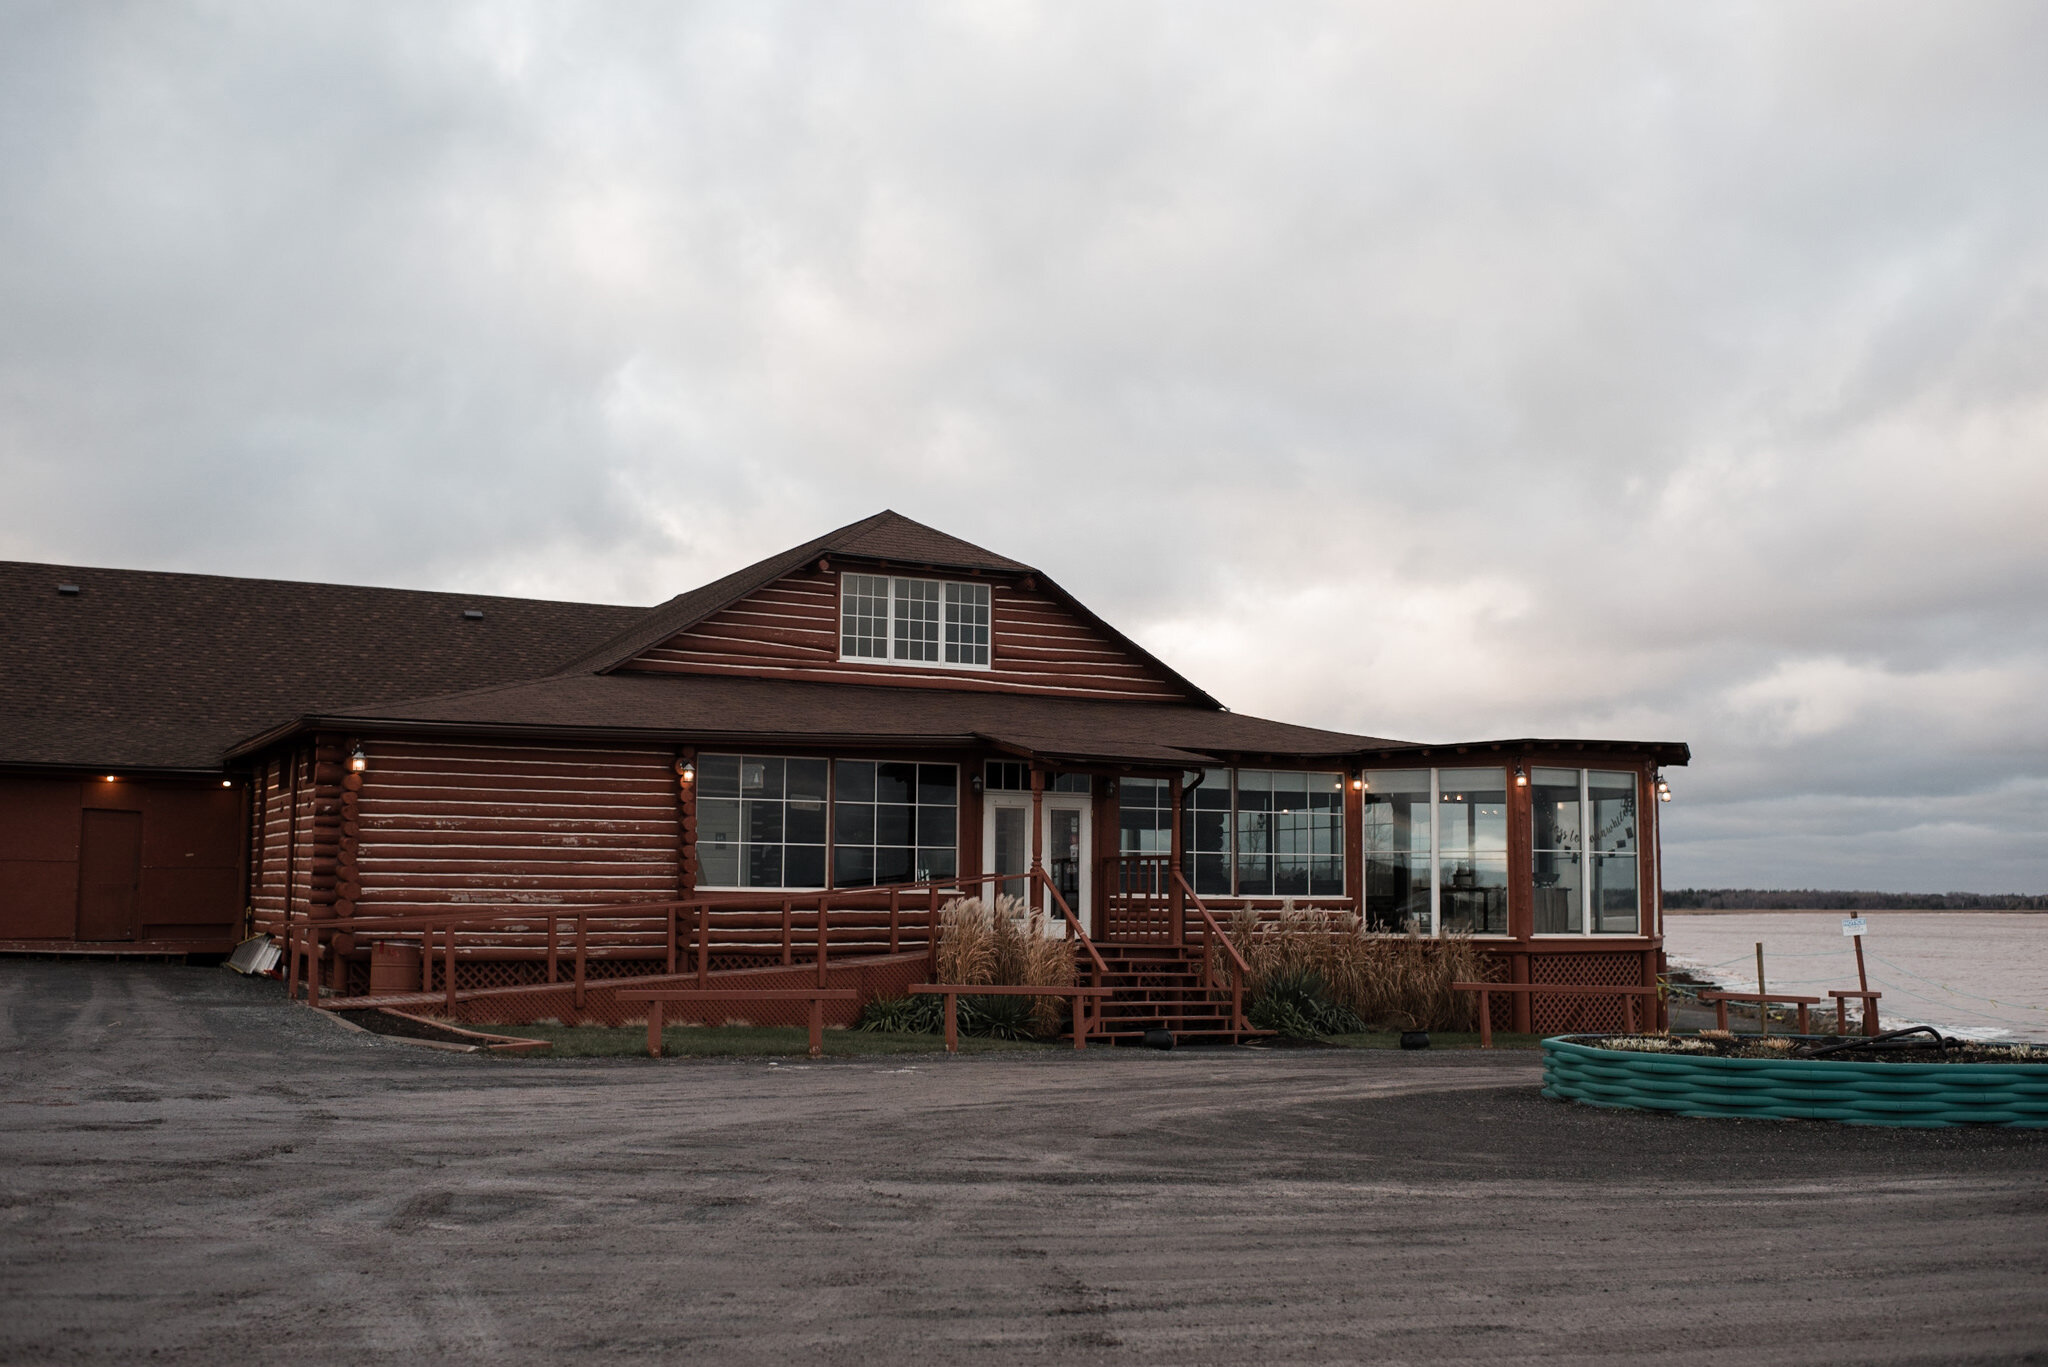 347-pictou-lodge-winter-wedding-by-the-sea-cabin-cottage-romantic.jpg